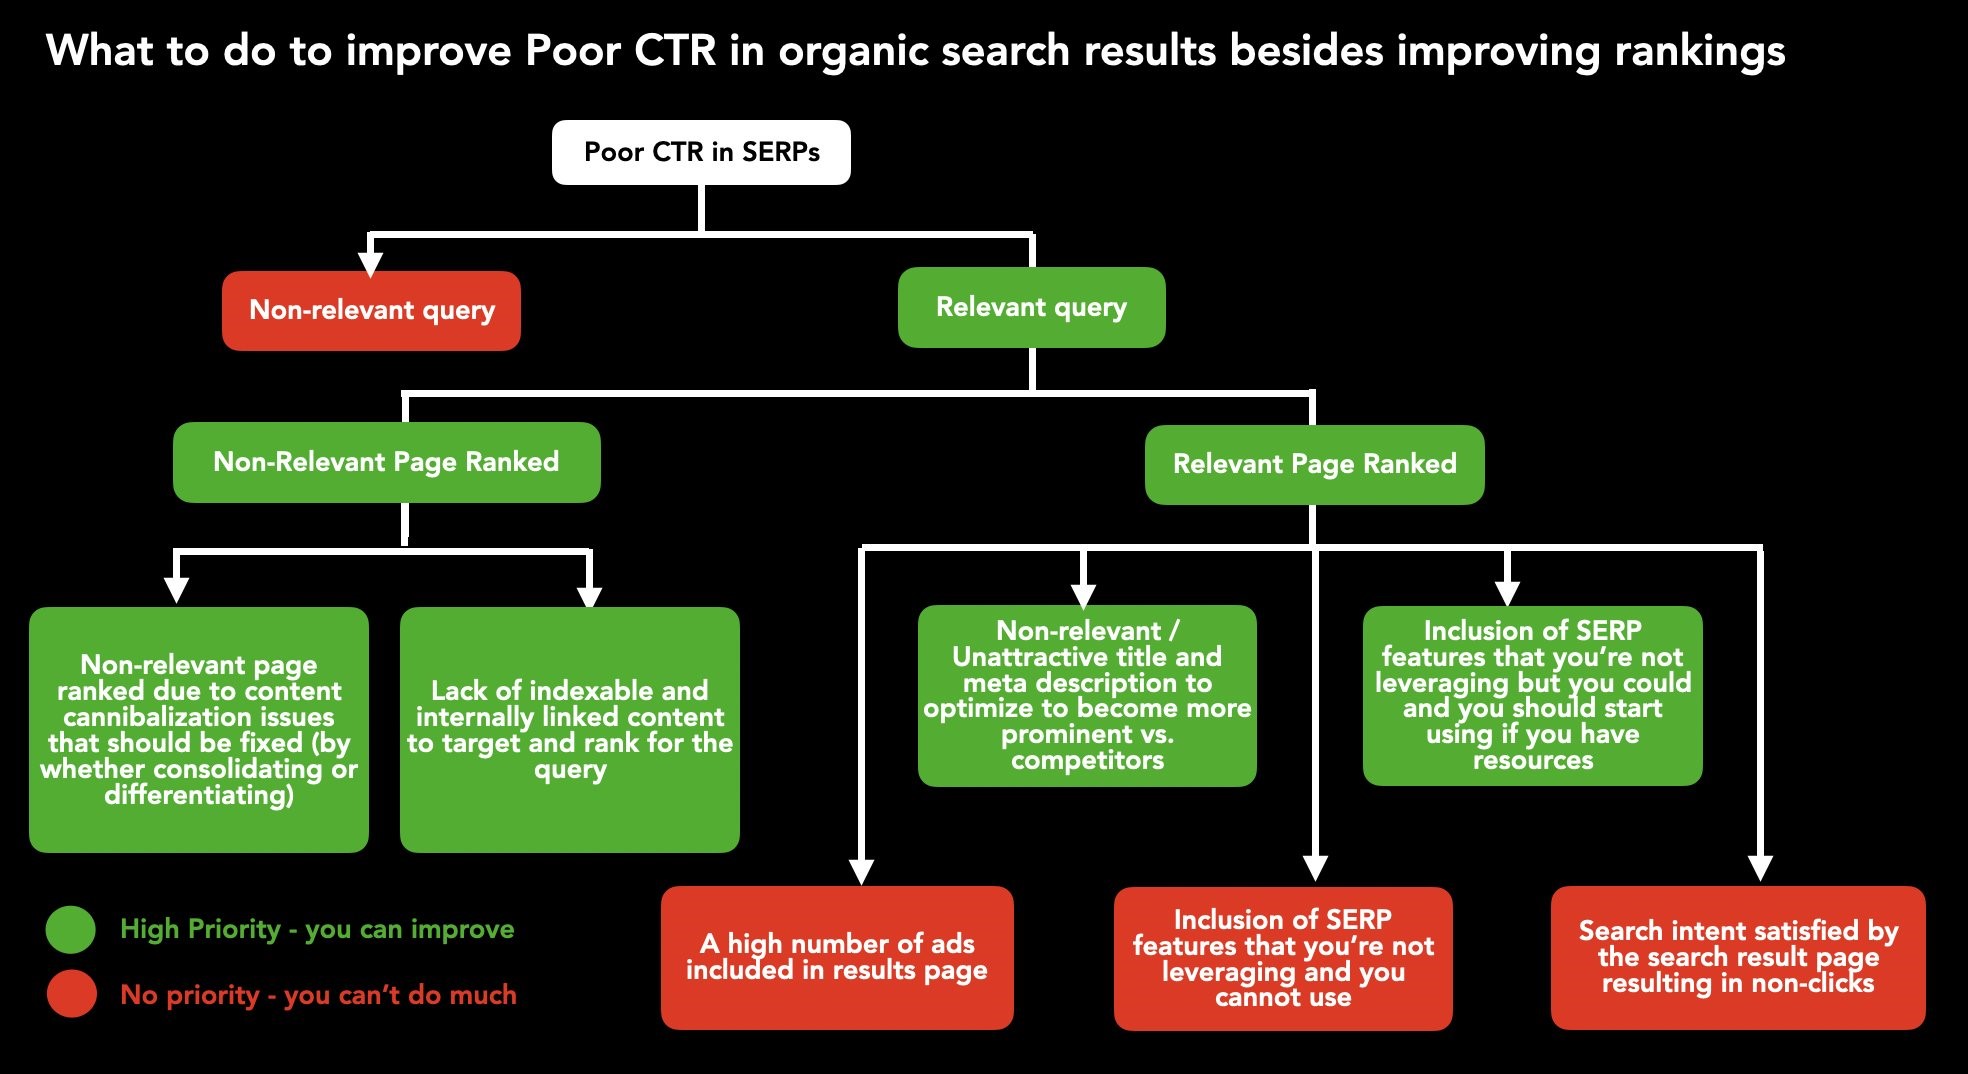 improve poor CTR in organic search results